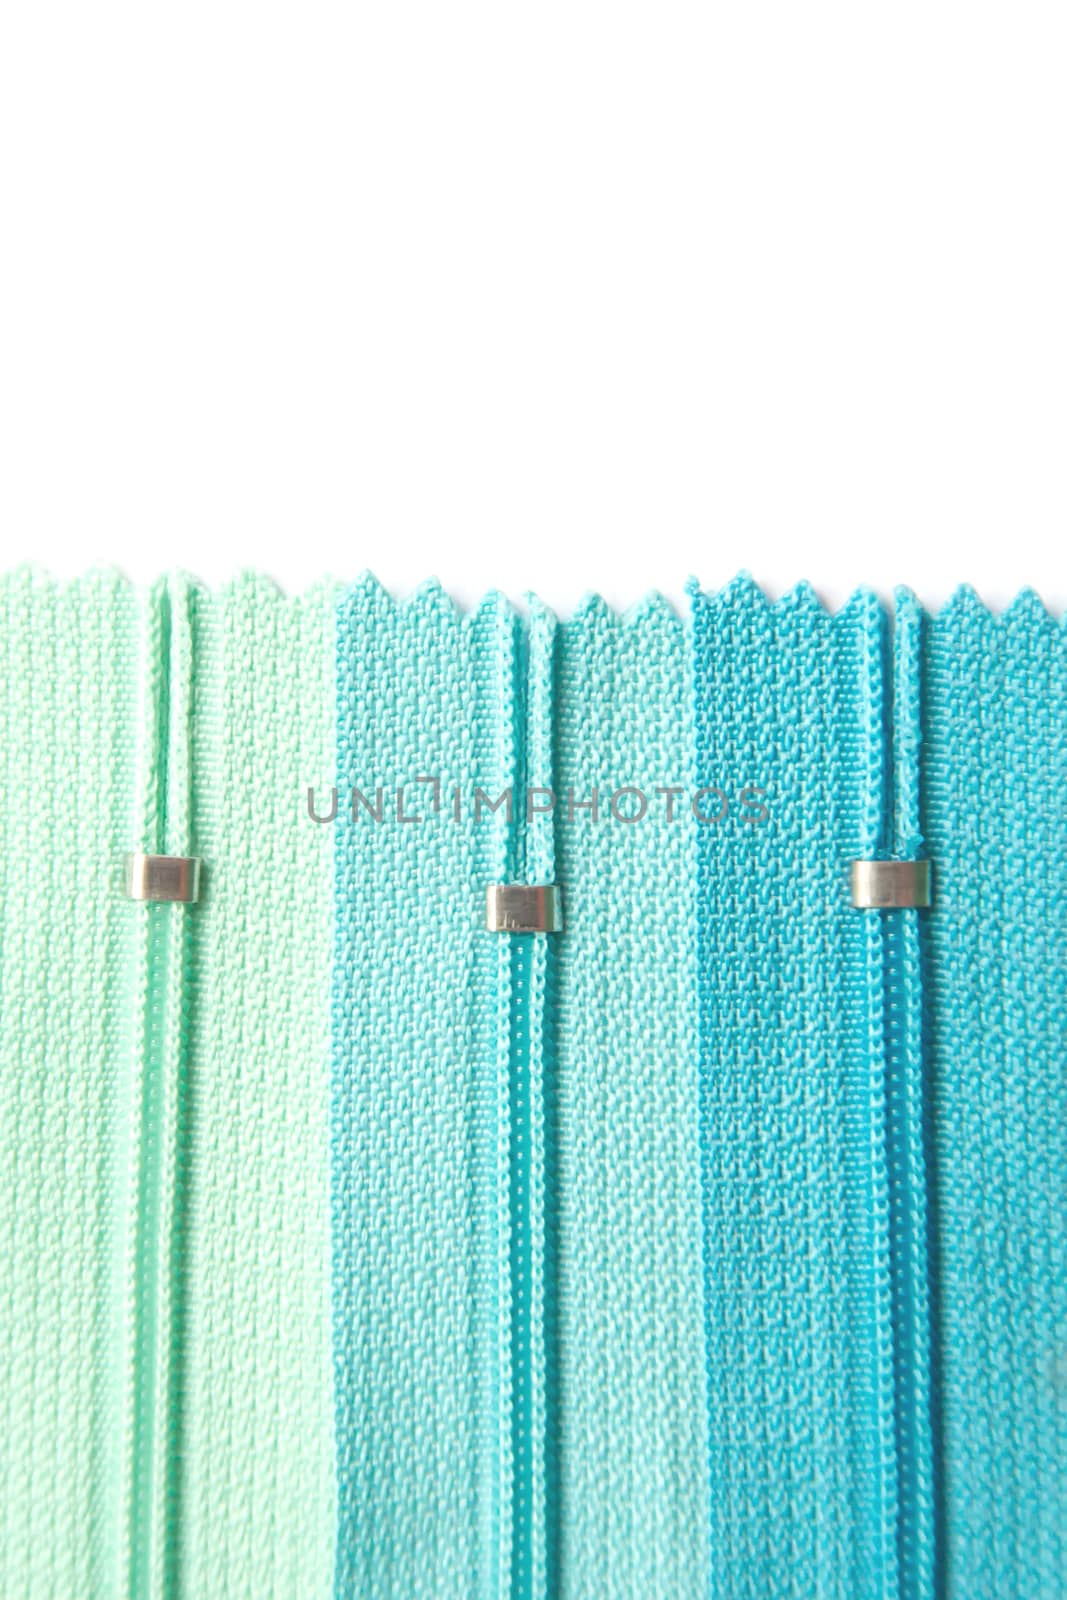 Clothing zipper pastel green and blue set isolated on white background